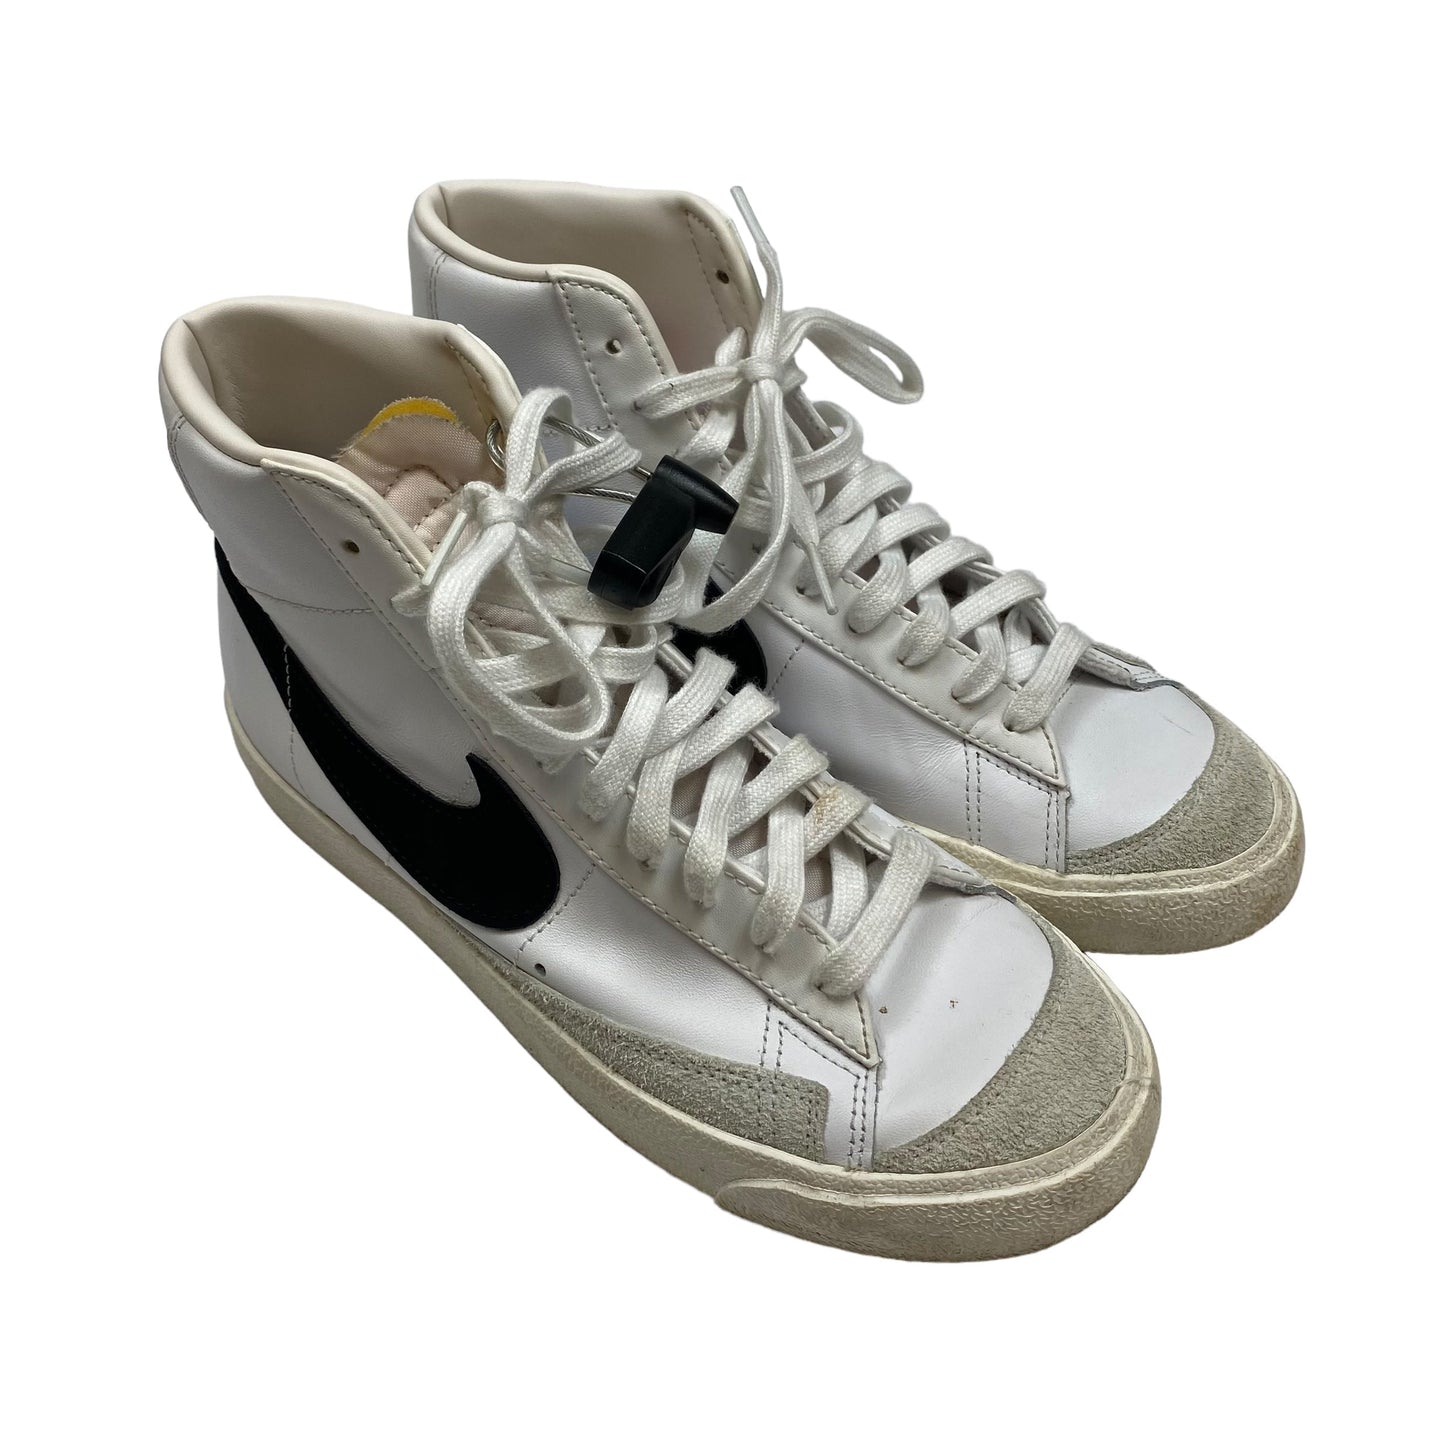 White Shoes Sneakers Nike, Size 9